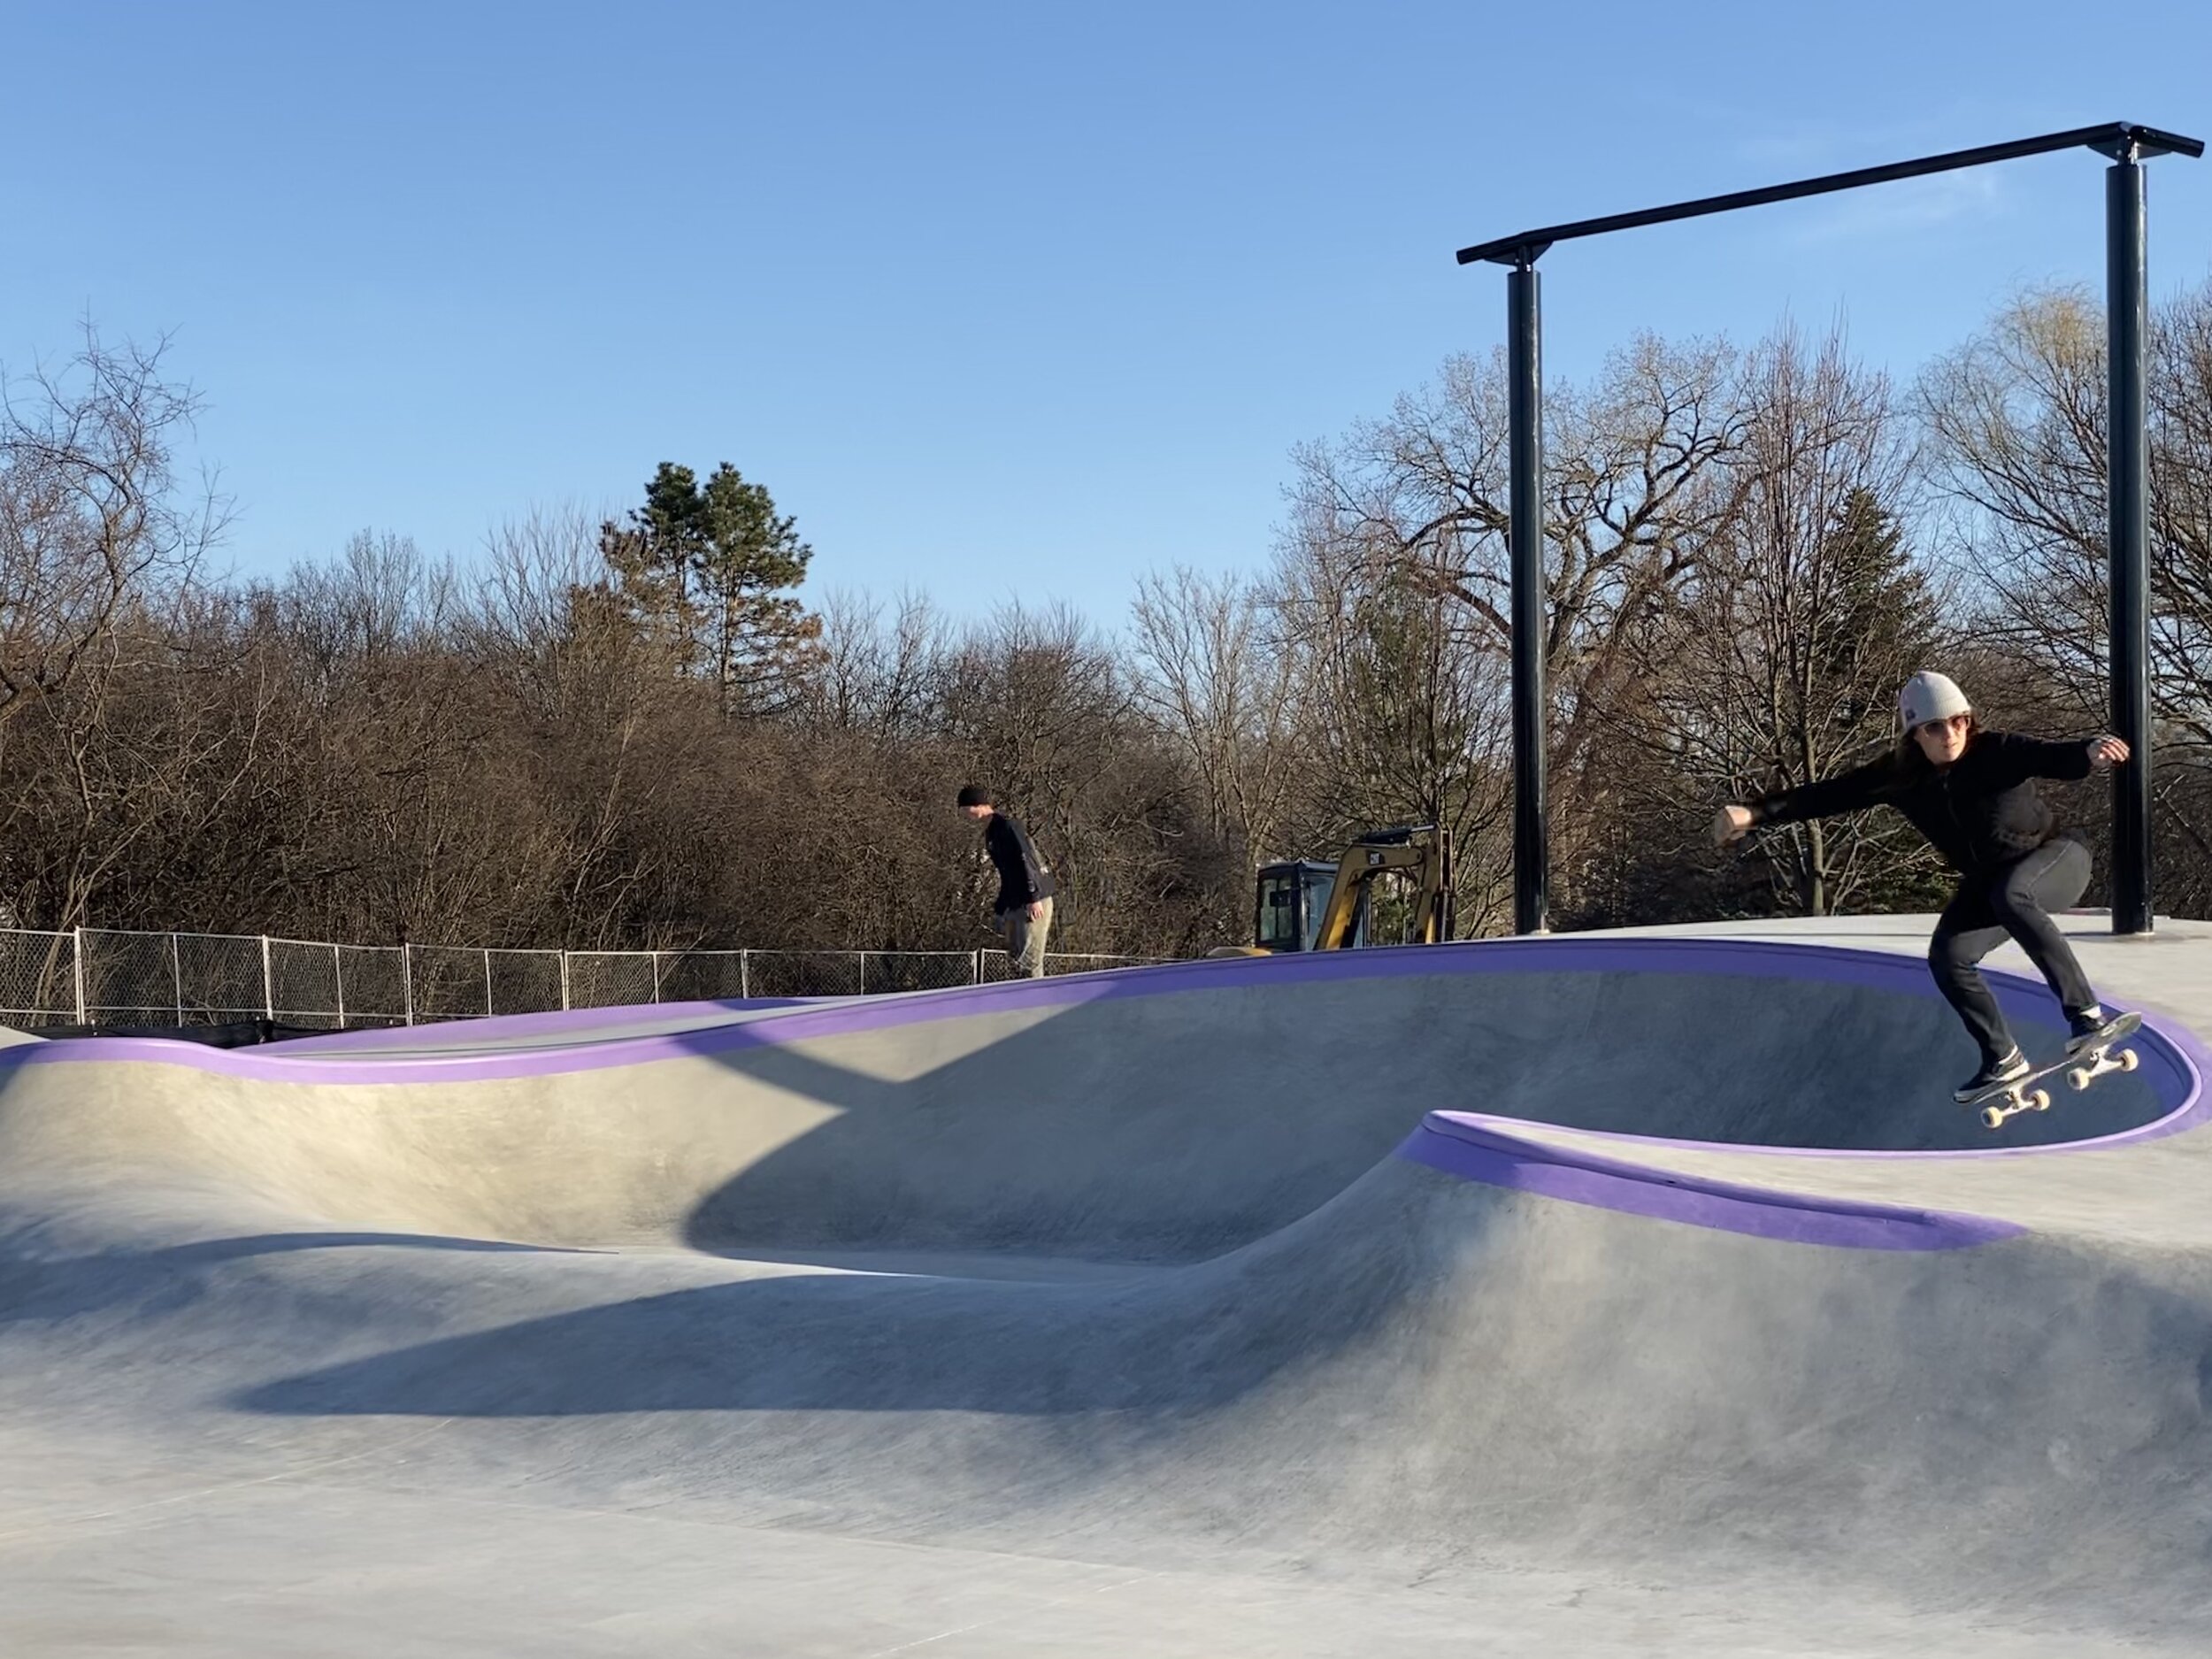 FUN test runs at the new Vernon Hills, Illinois skatepark 💥 #nootthedog approved ✅